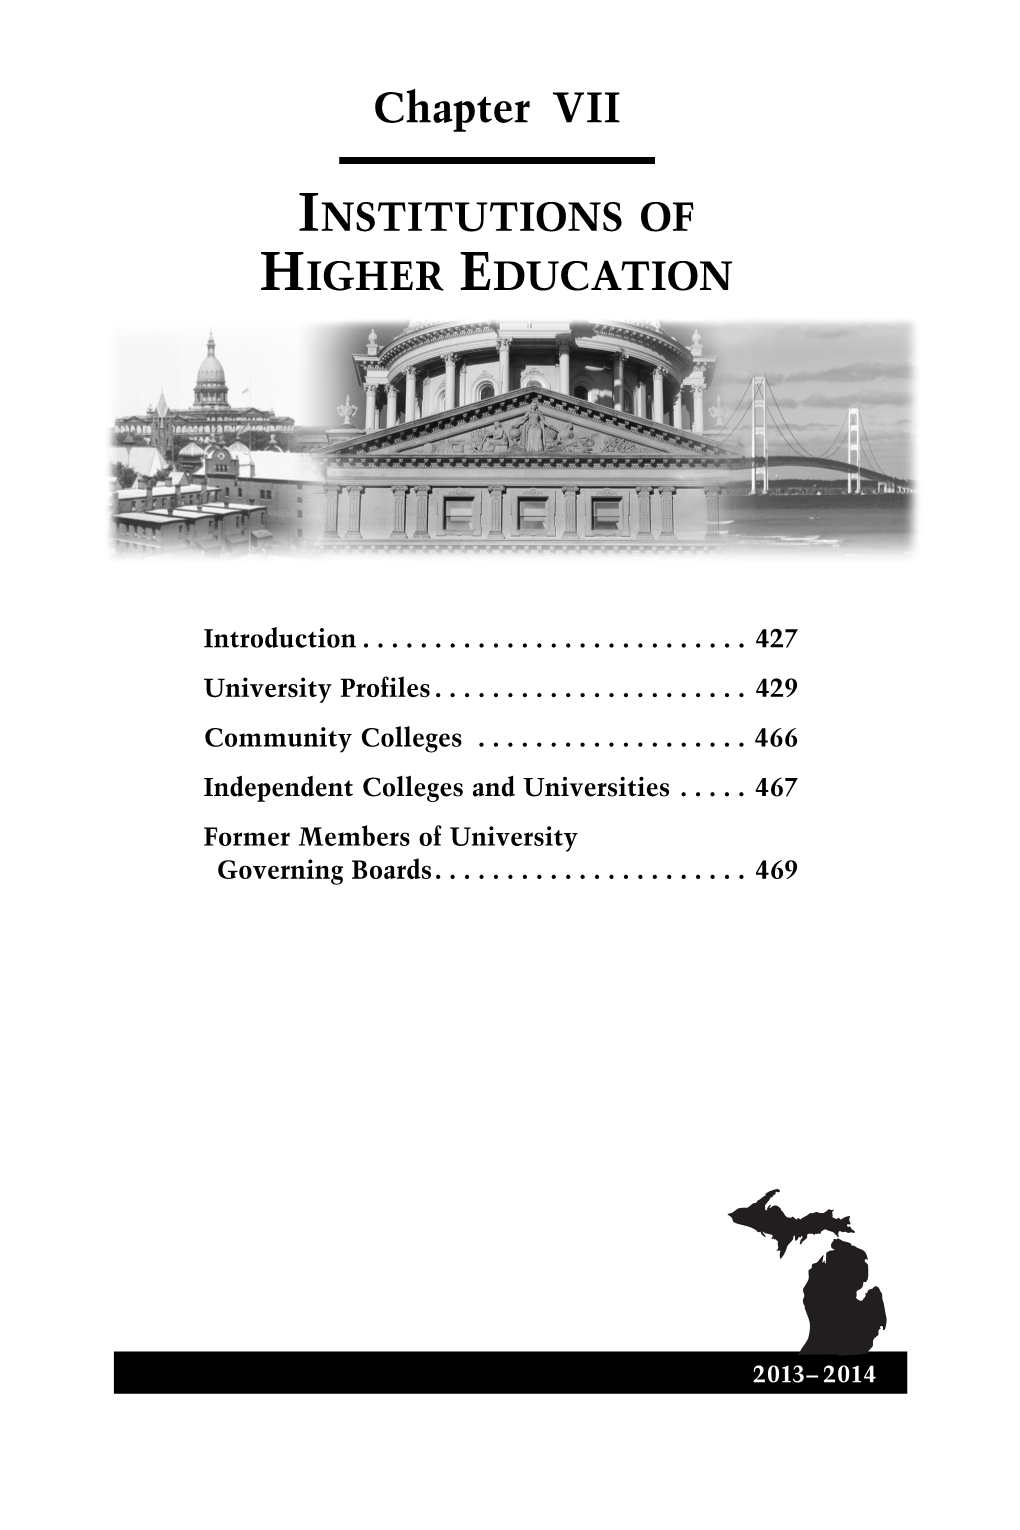 2013-2014 MM Institutions of Higher Education